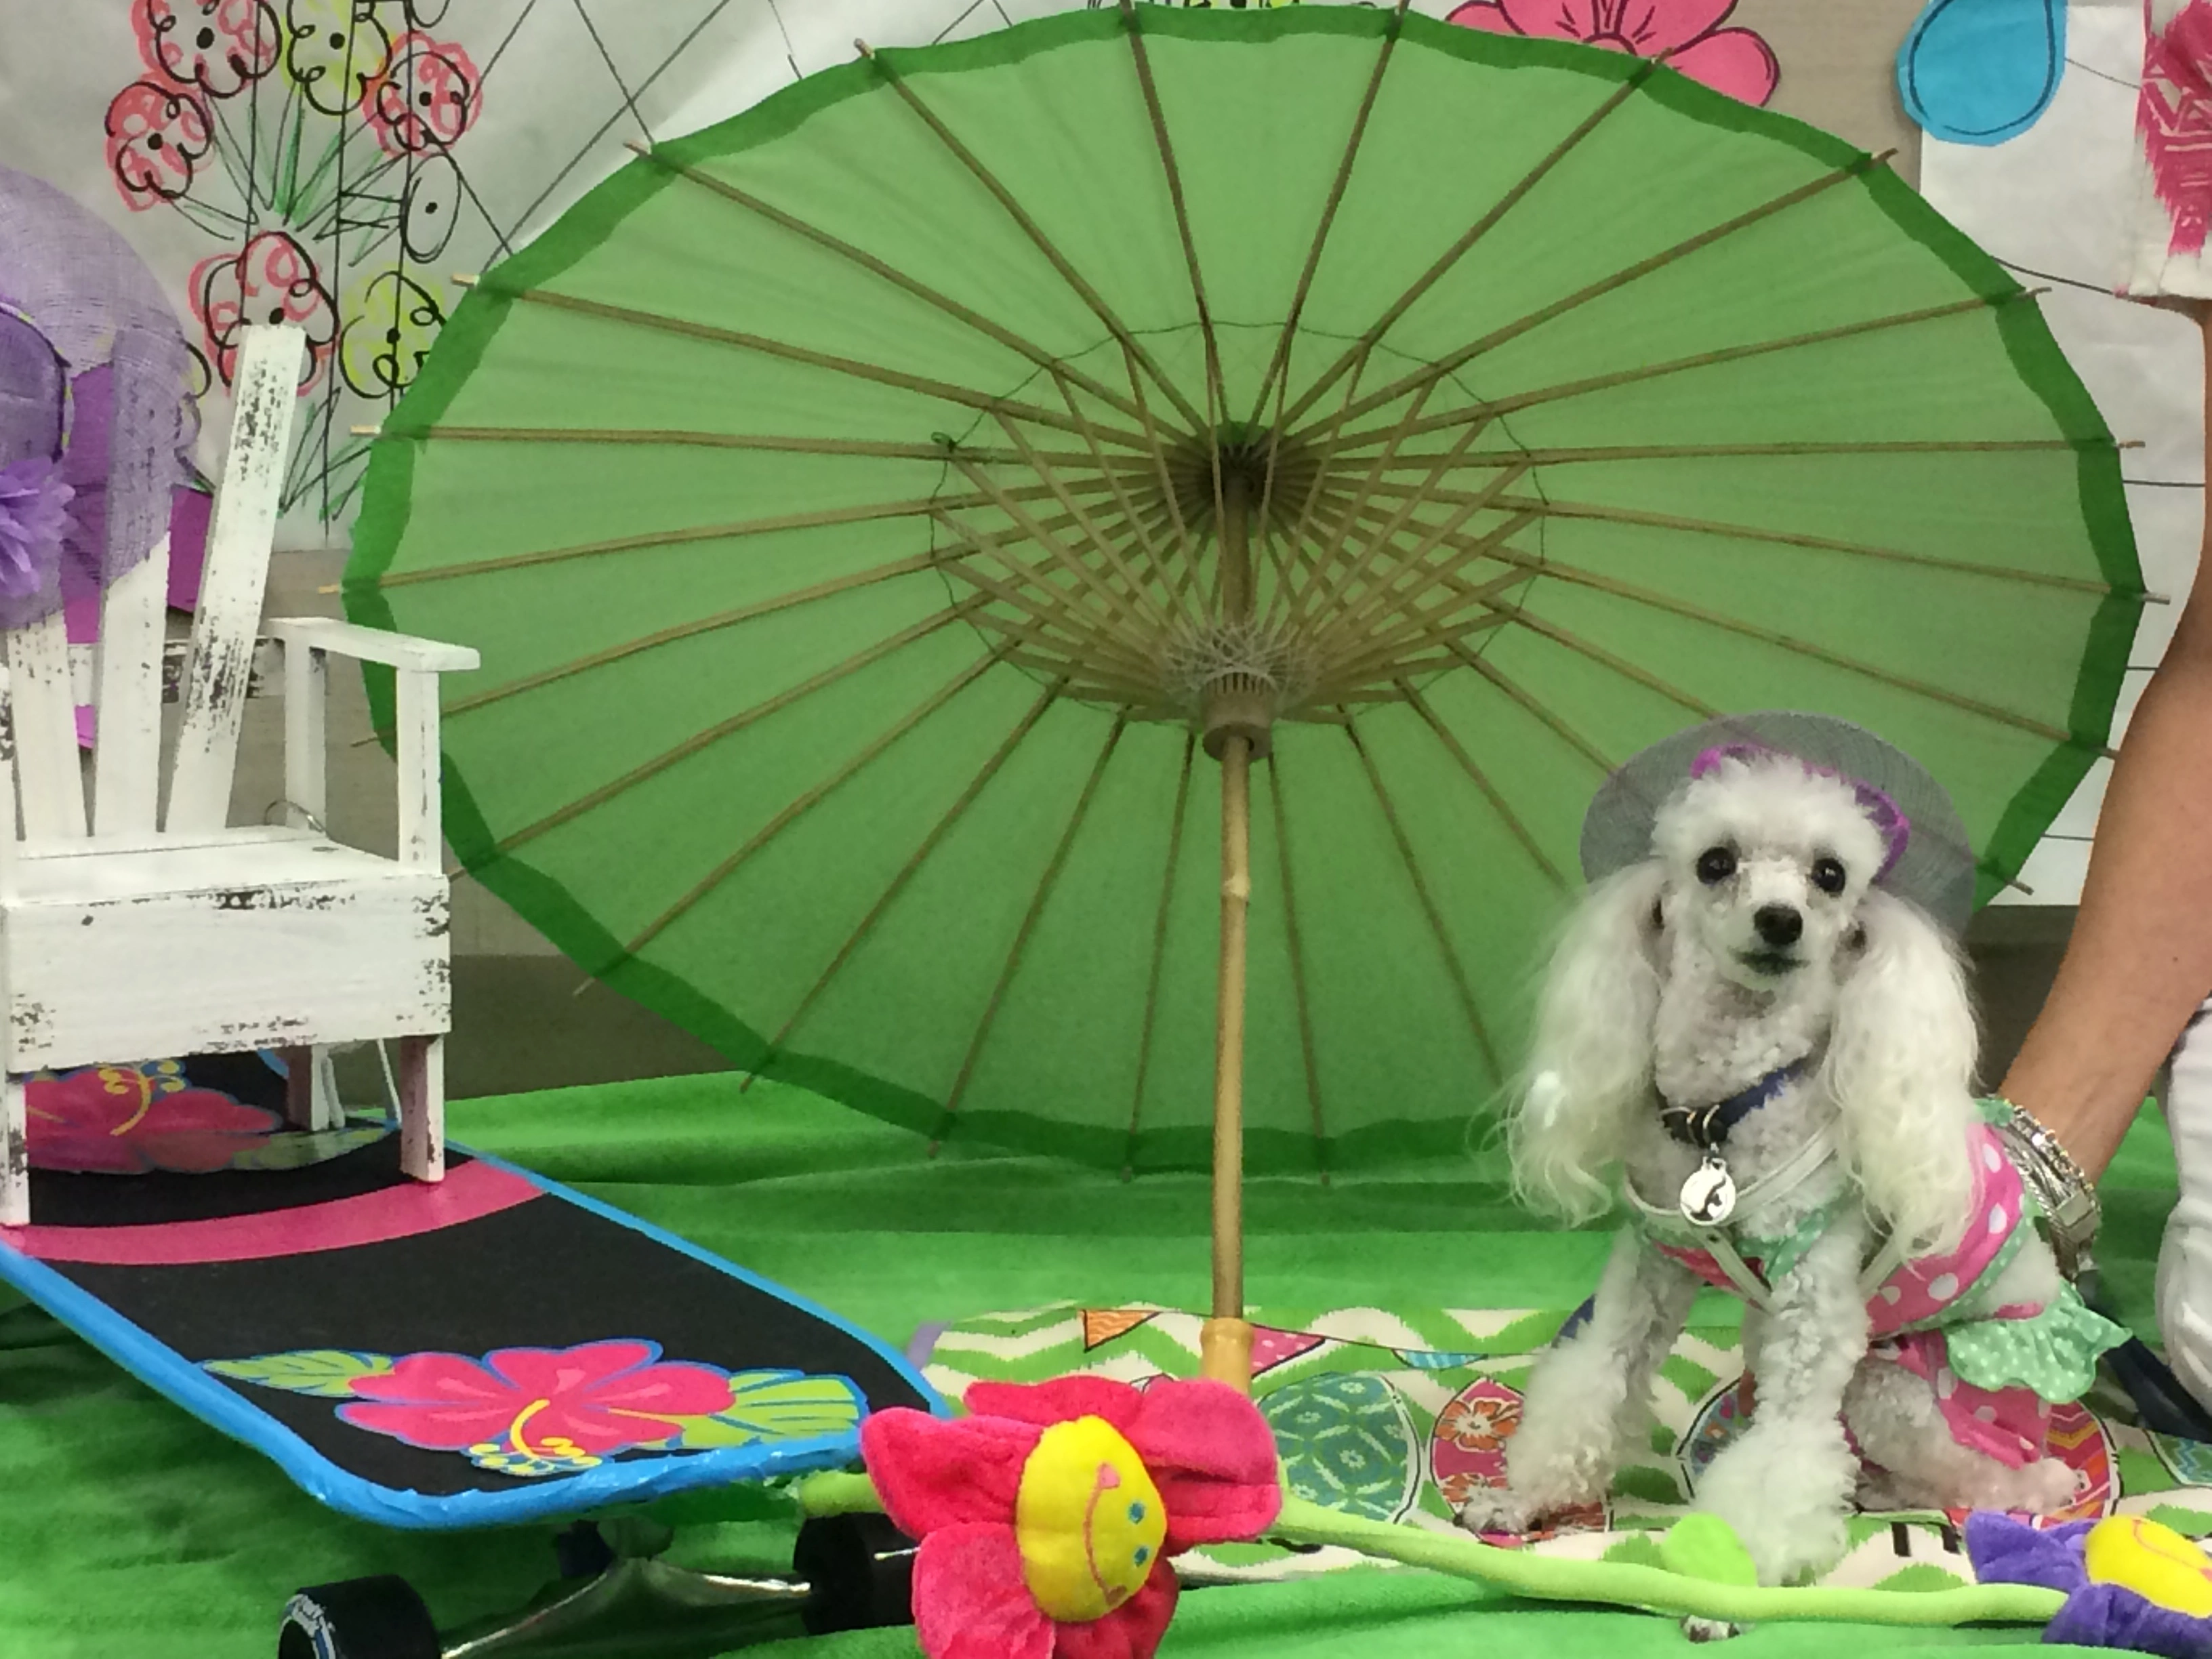 Animal assisted therapy pets stay cool at the Dog Days of Summer event